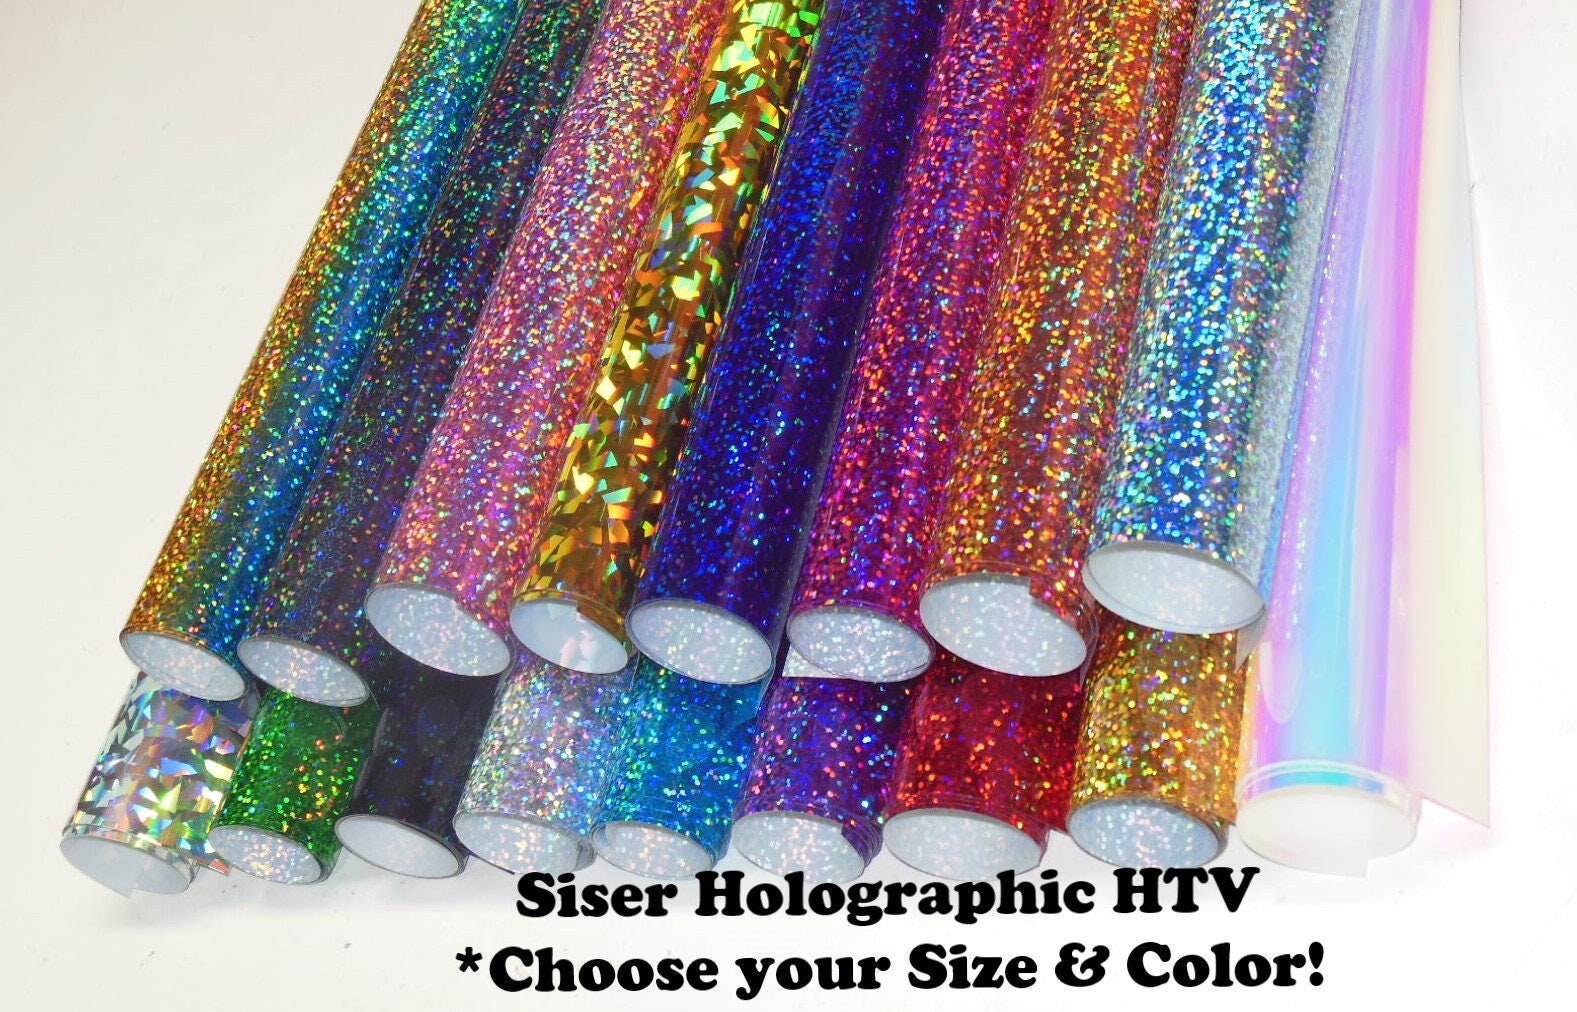 12 x 12 Permanent Adhesive Vinyl Sheets Fantasy Sequin Holographic  Glitter for Cricut, Silhouette Cameo, Craft Cutters etc.